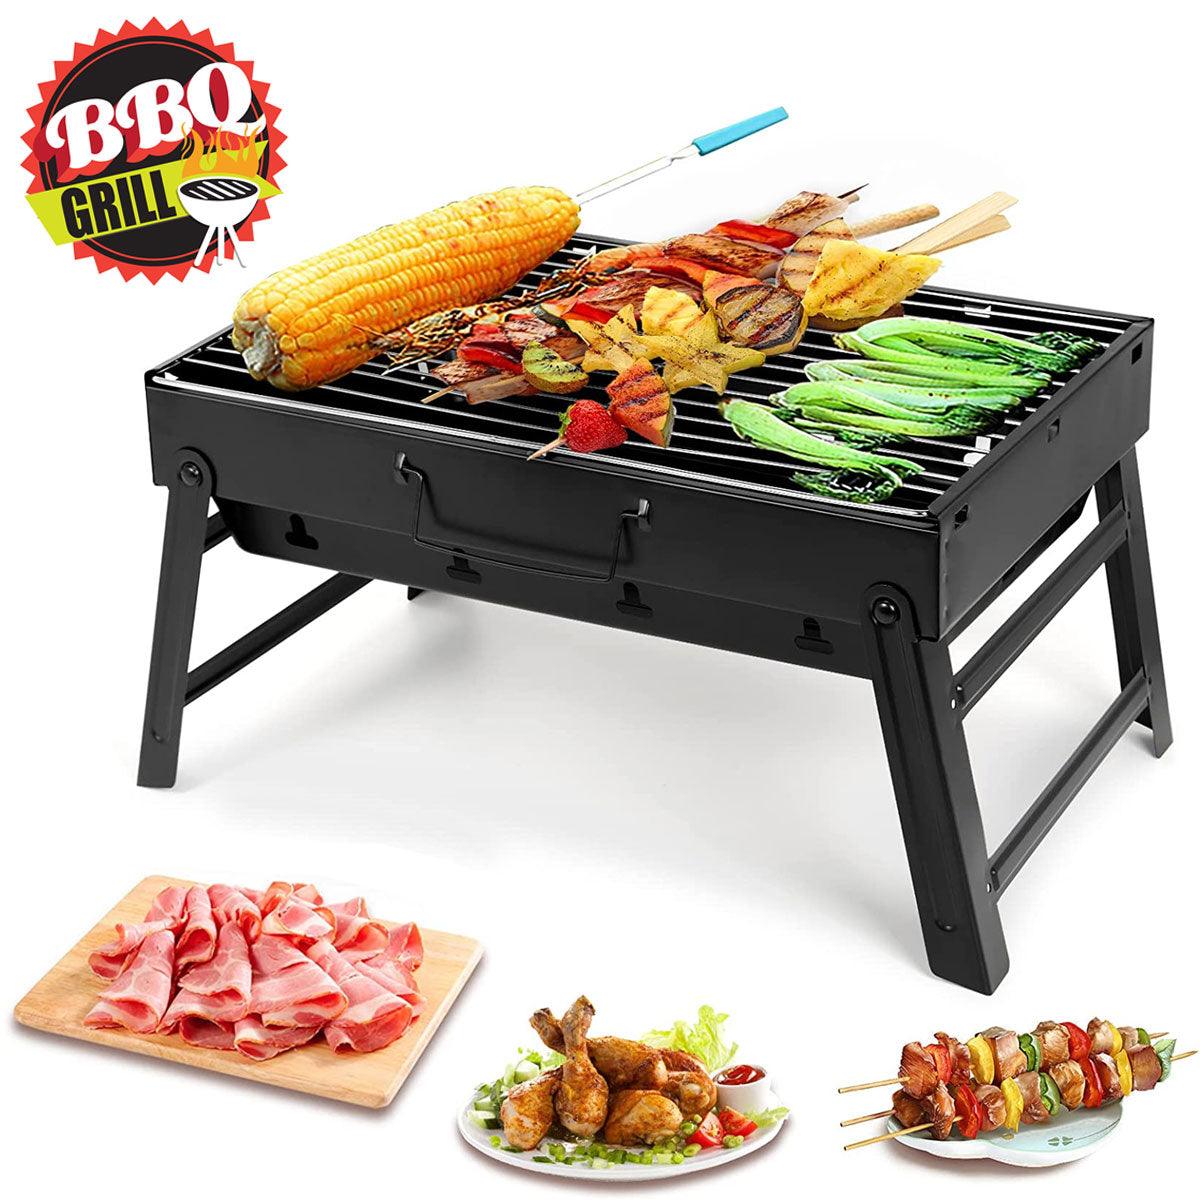 BBQ Small Foldable Barbecue Charcoal Grill - TruVeli